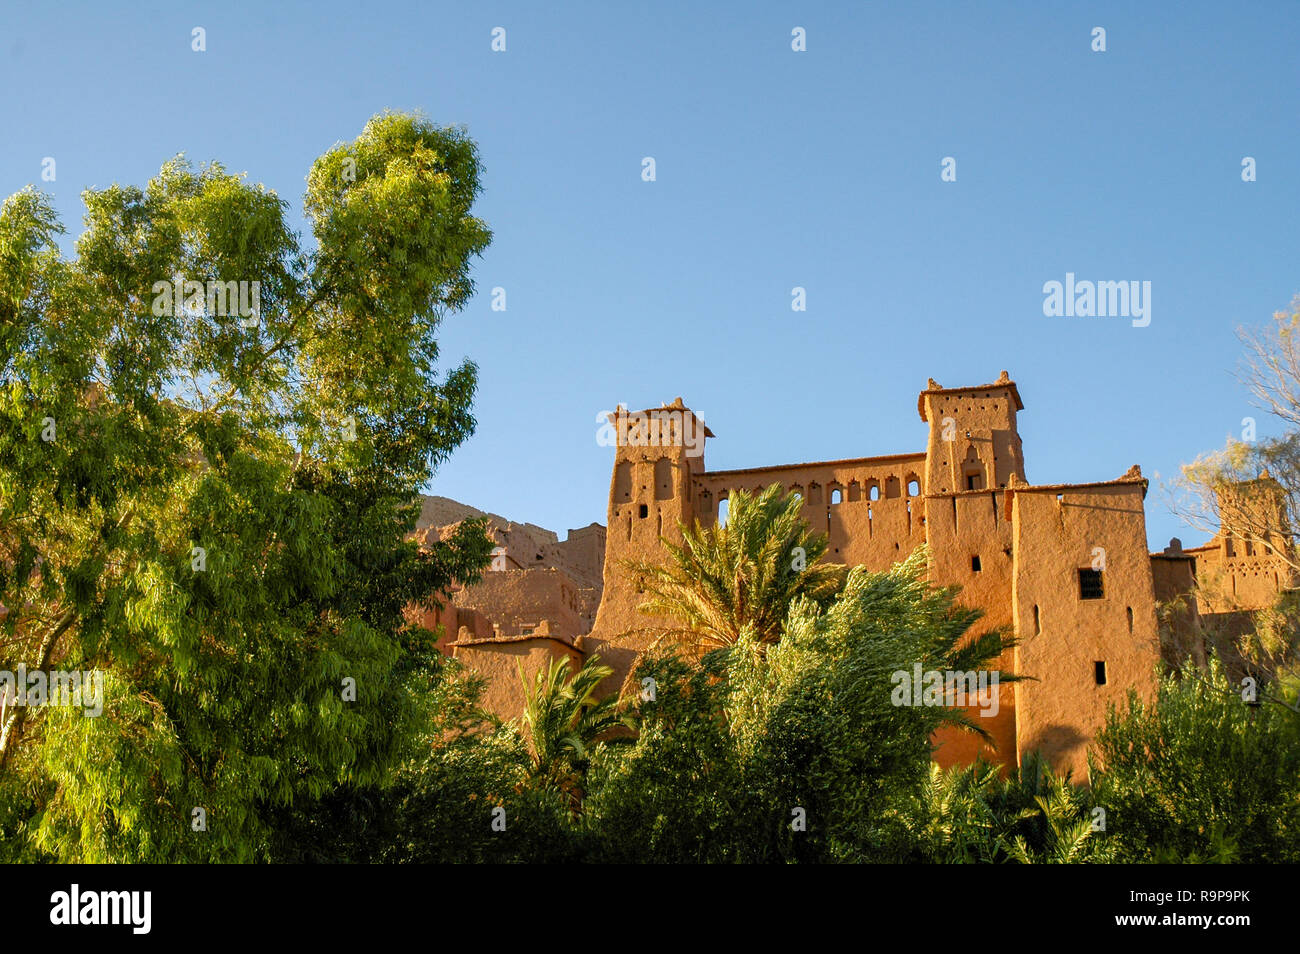 the famous casbah of Art Benhaddou in Maroc Stock Photo